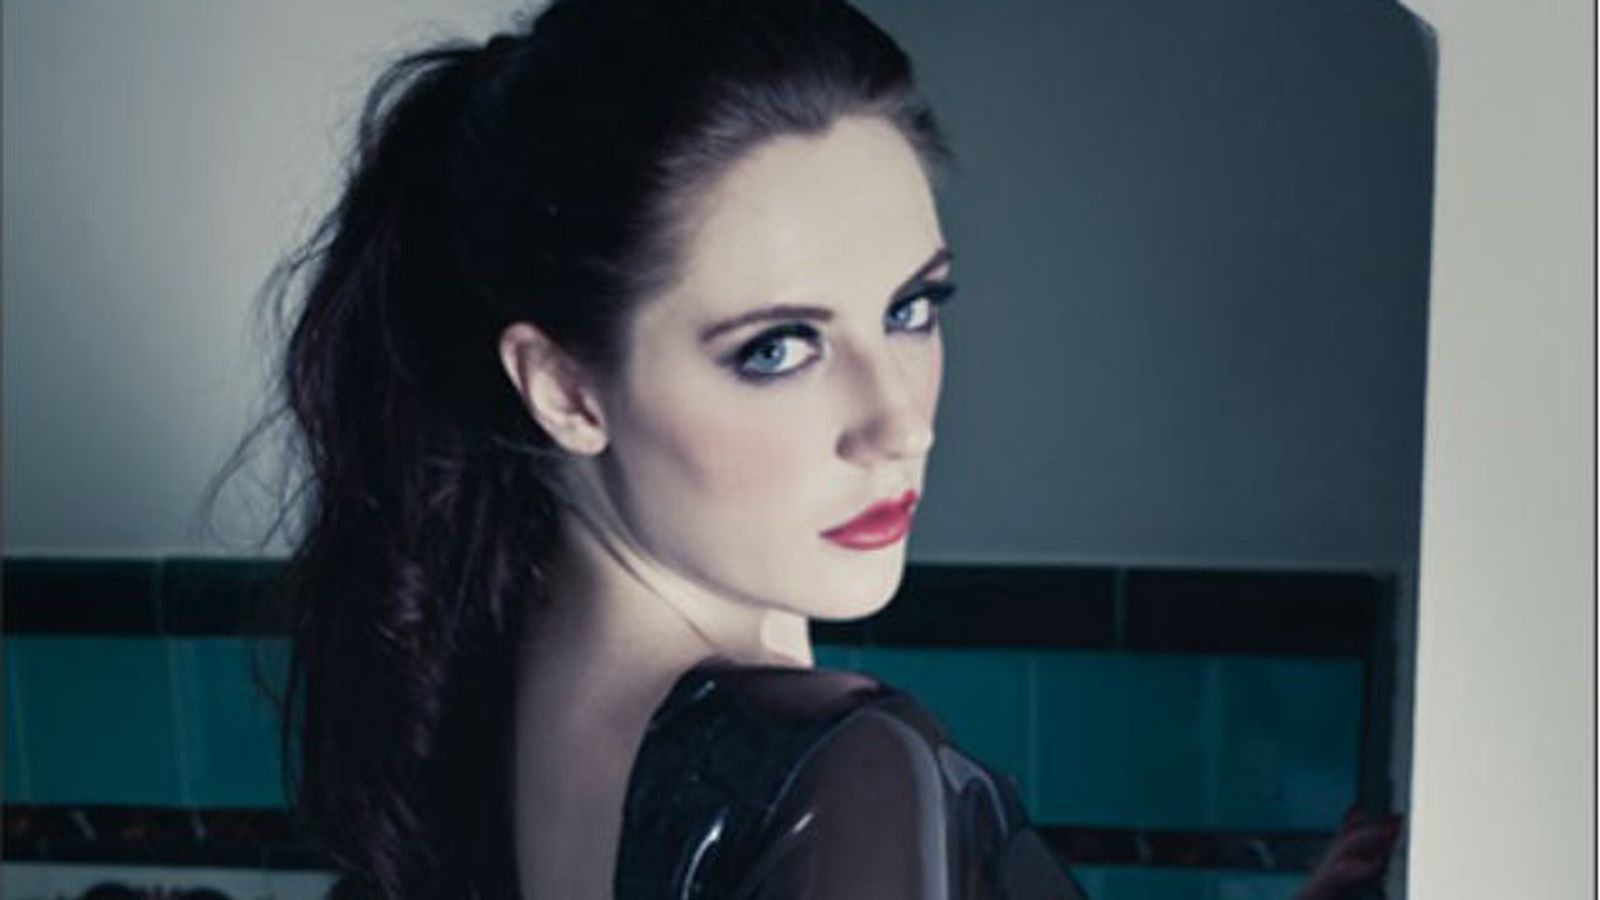 Samantha Bentley Earns AVN Awards Nom for Performer of the Year